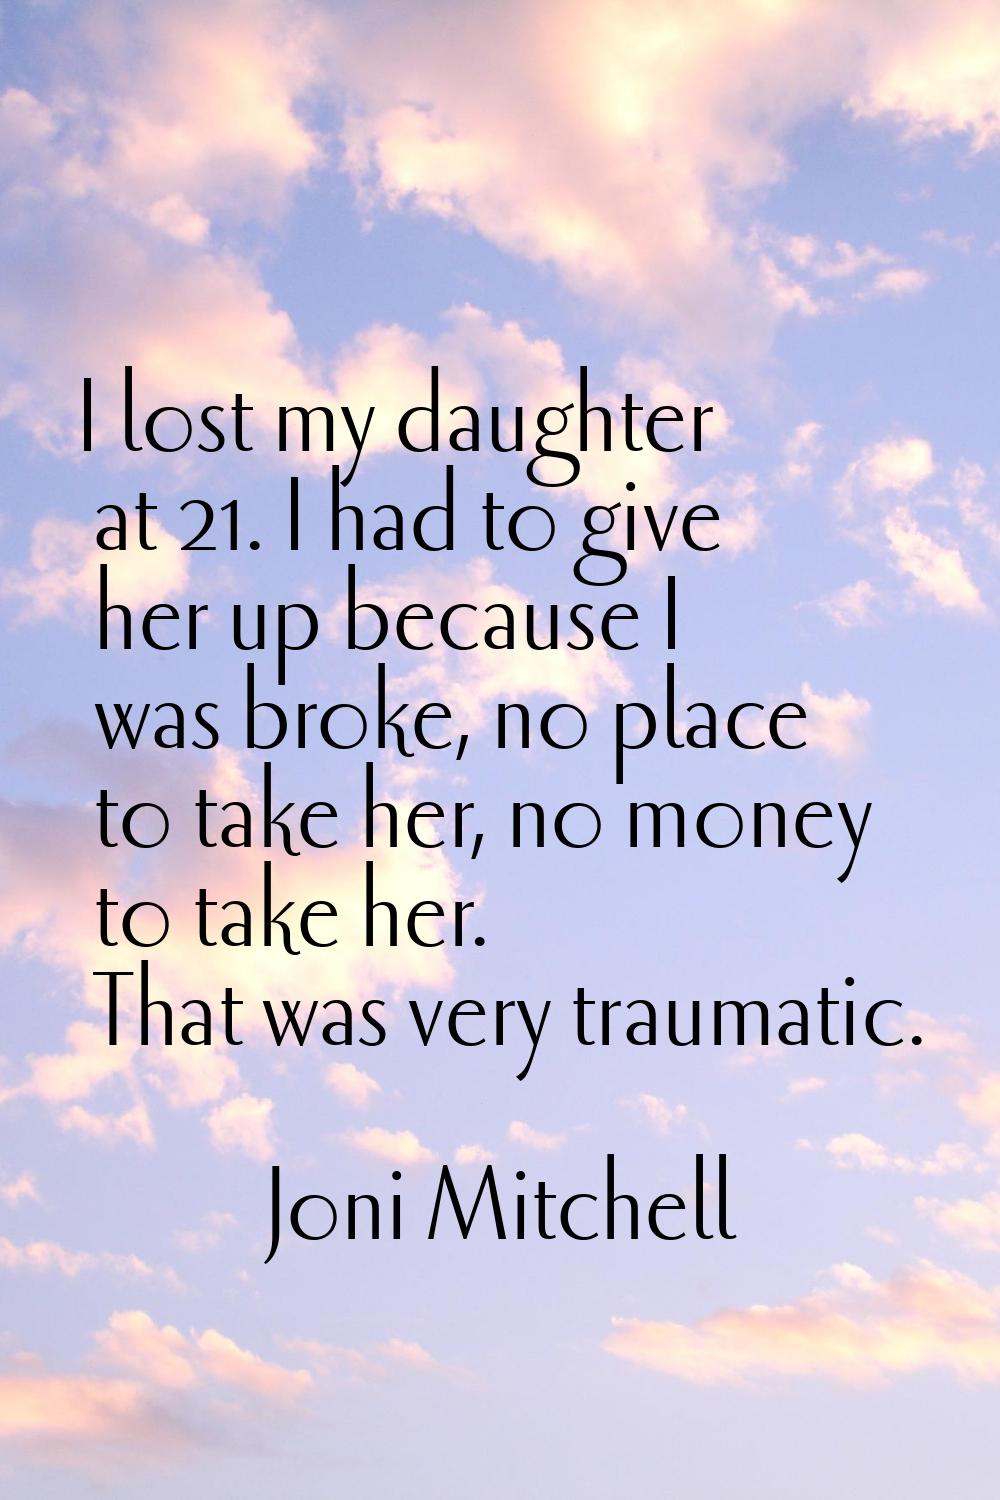 I lost my daughter at 21. I had to give her up because I was broke, no place to take her, no money 